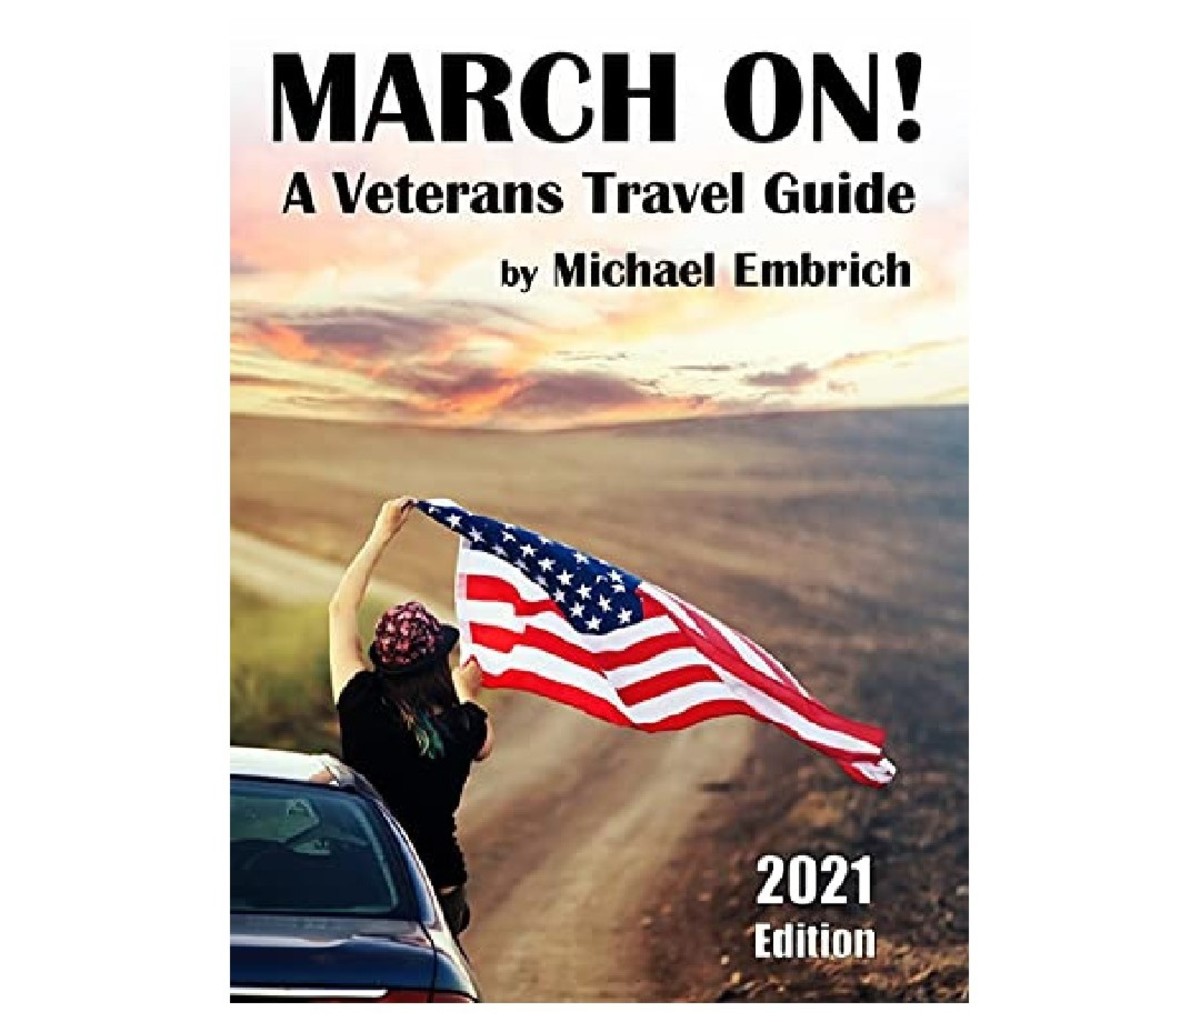 The book cover of March On: A Veterans Travel Guide by Michael Embrich